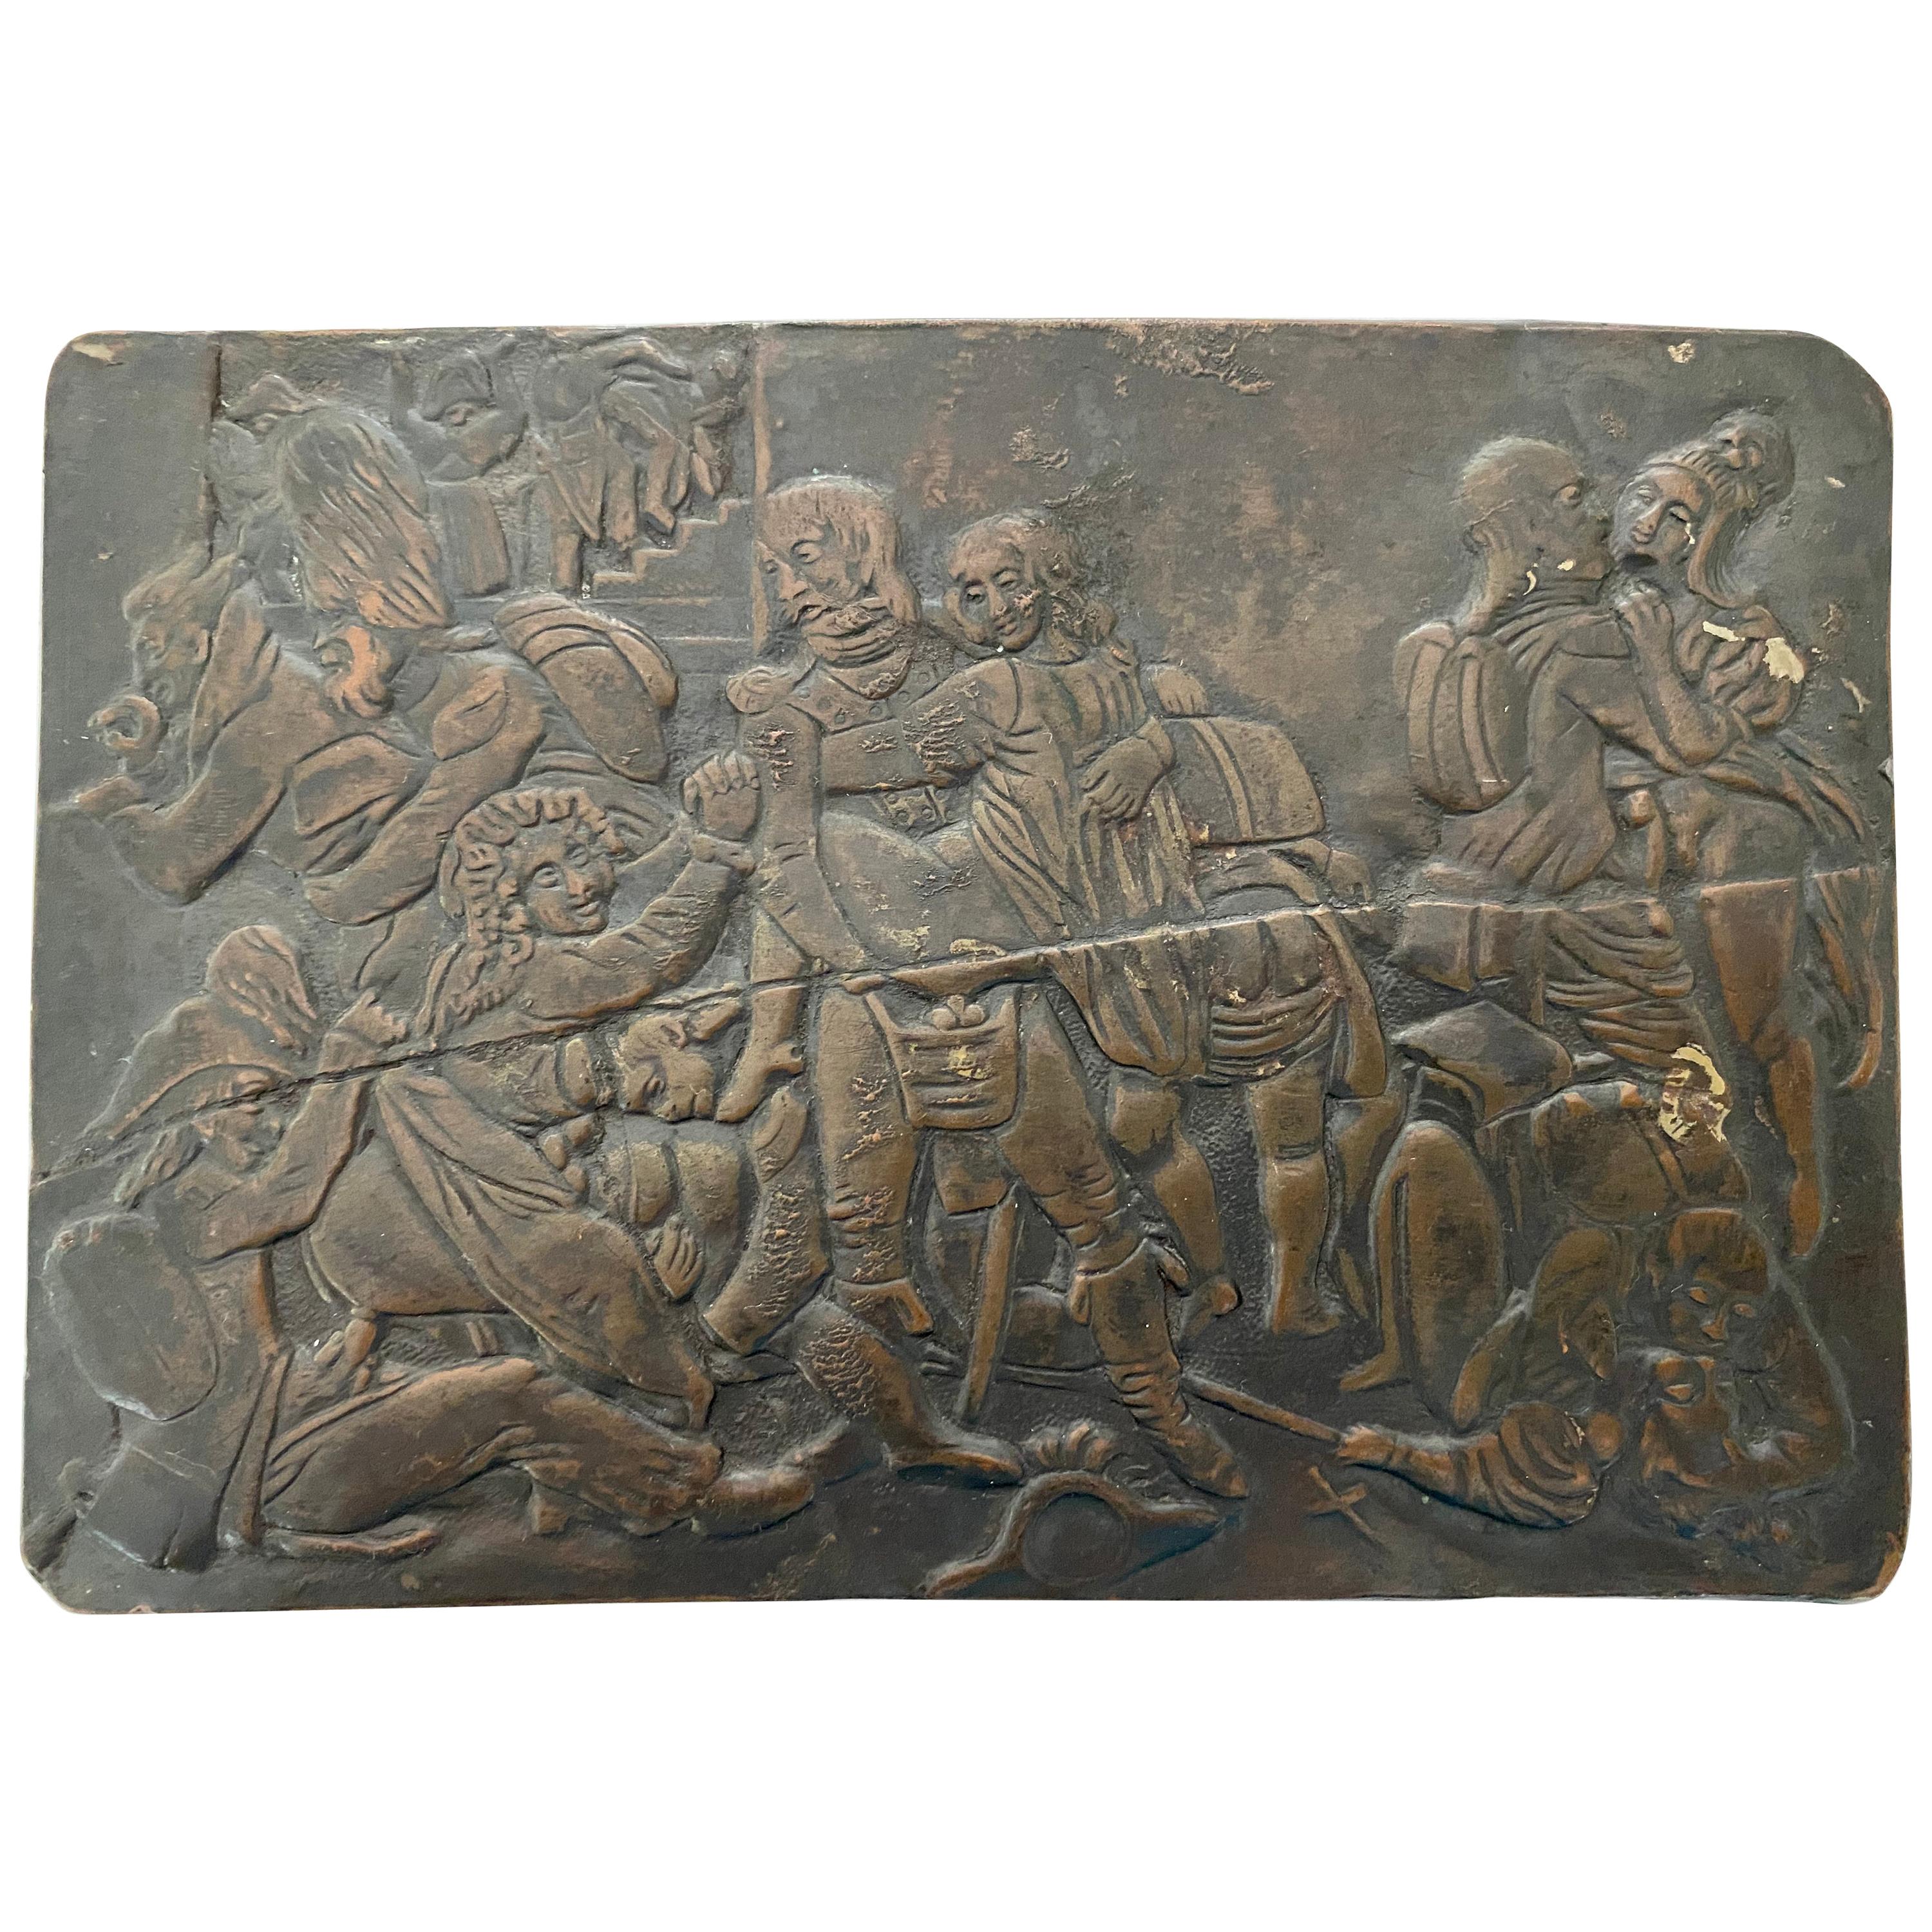 Erotic Copper Repoussé Relief of an Orgy with French Soldiers, Mid- 19th Century